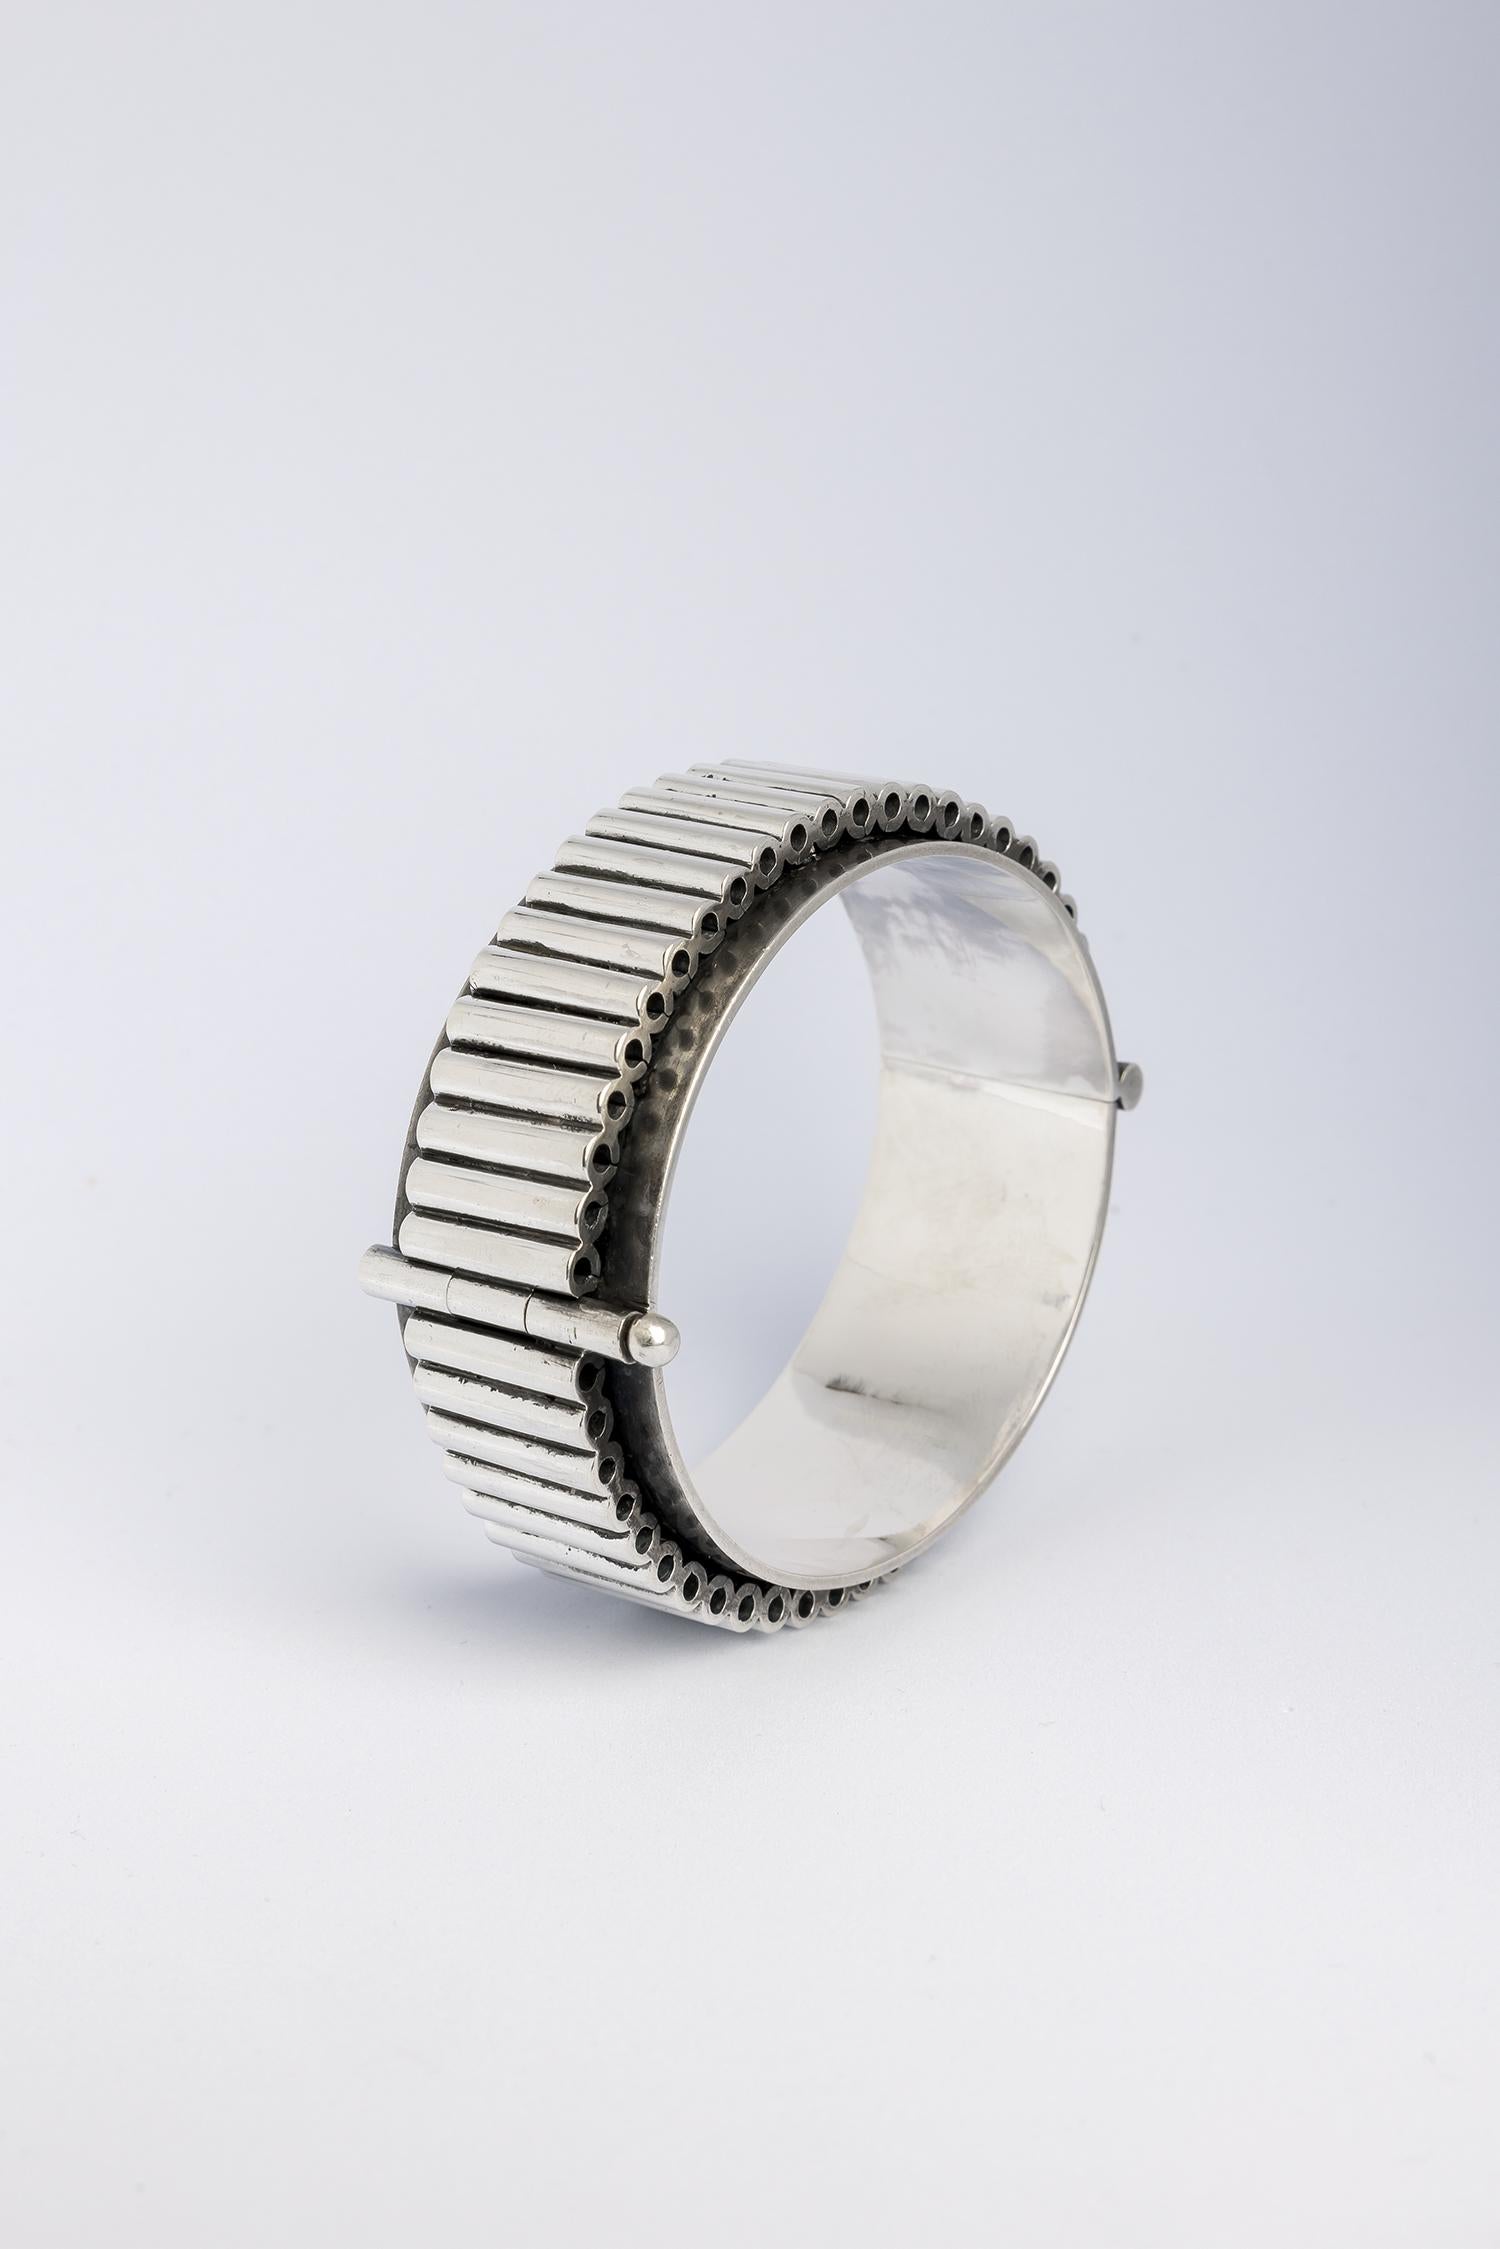 Retro machine-inspired 1960s heavy solid silver bracelet from A. Tillander In Good Condition For Sale In Malmö, SE